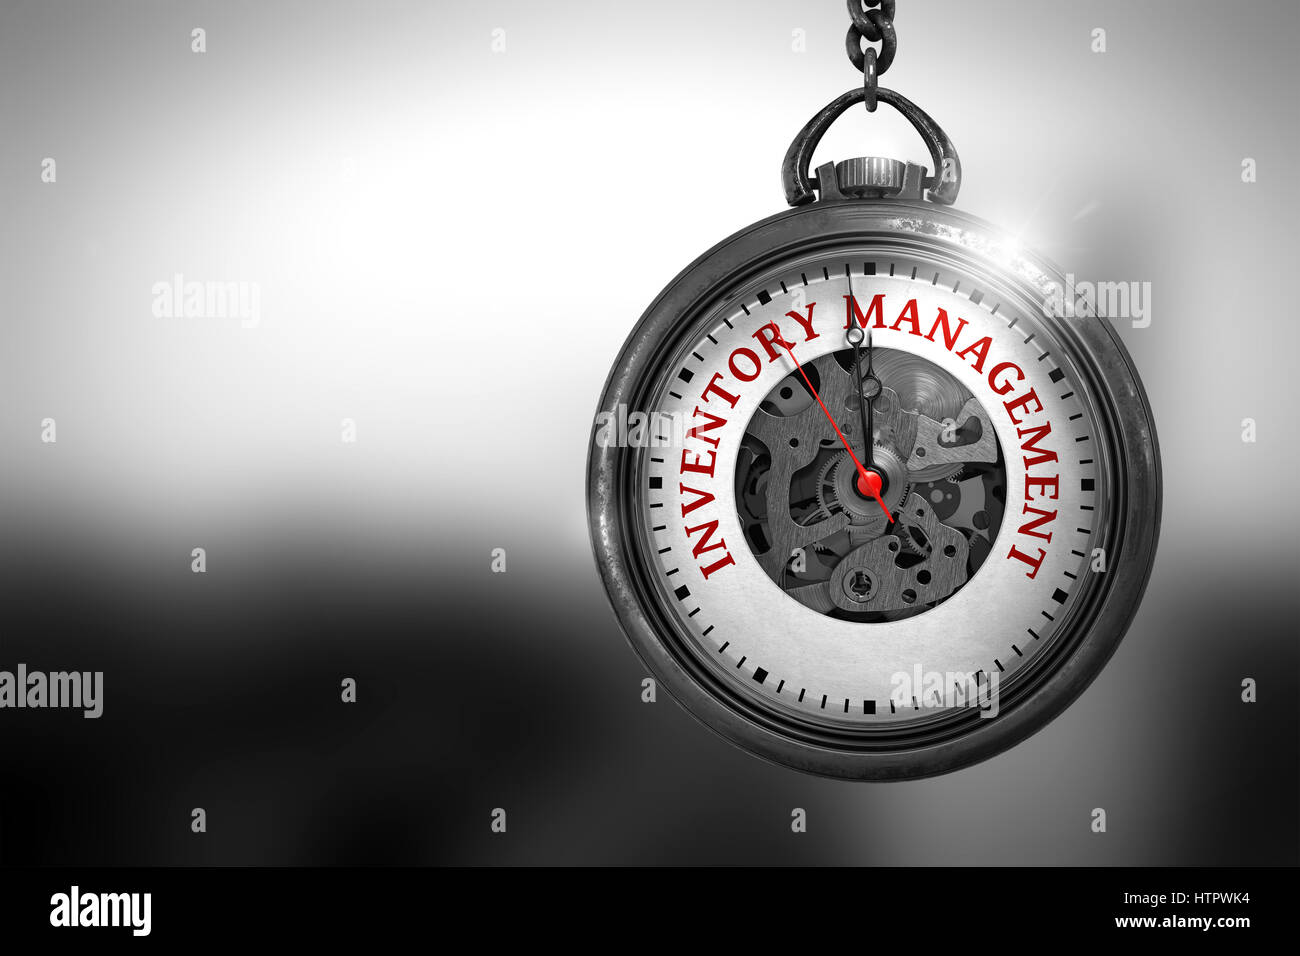 Inventory Management on Watch Face. 3D Illustration. Stock Photo